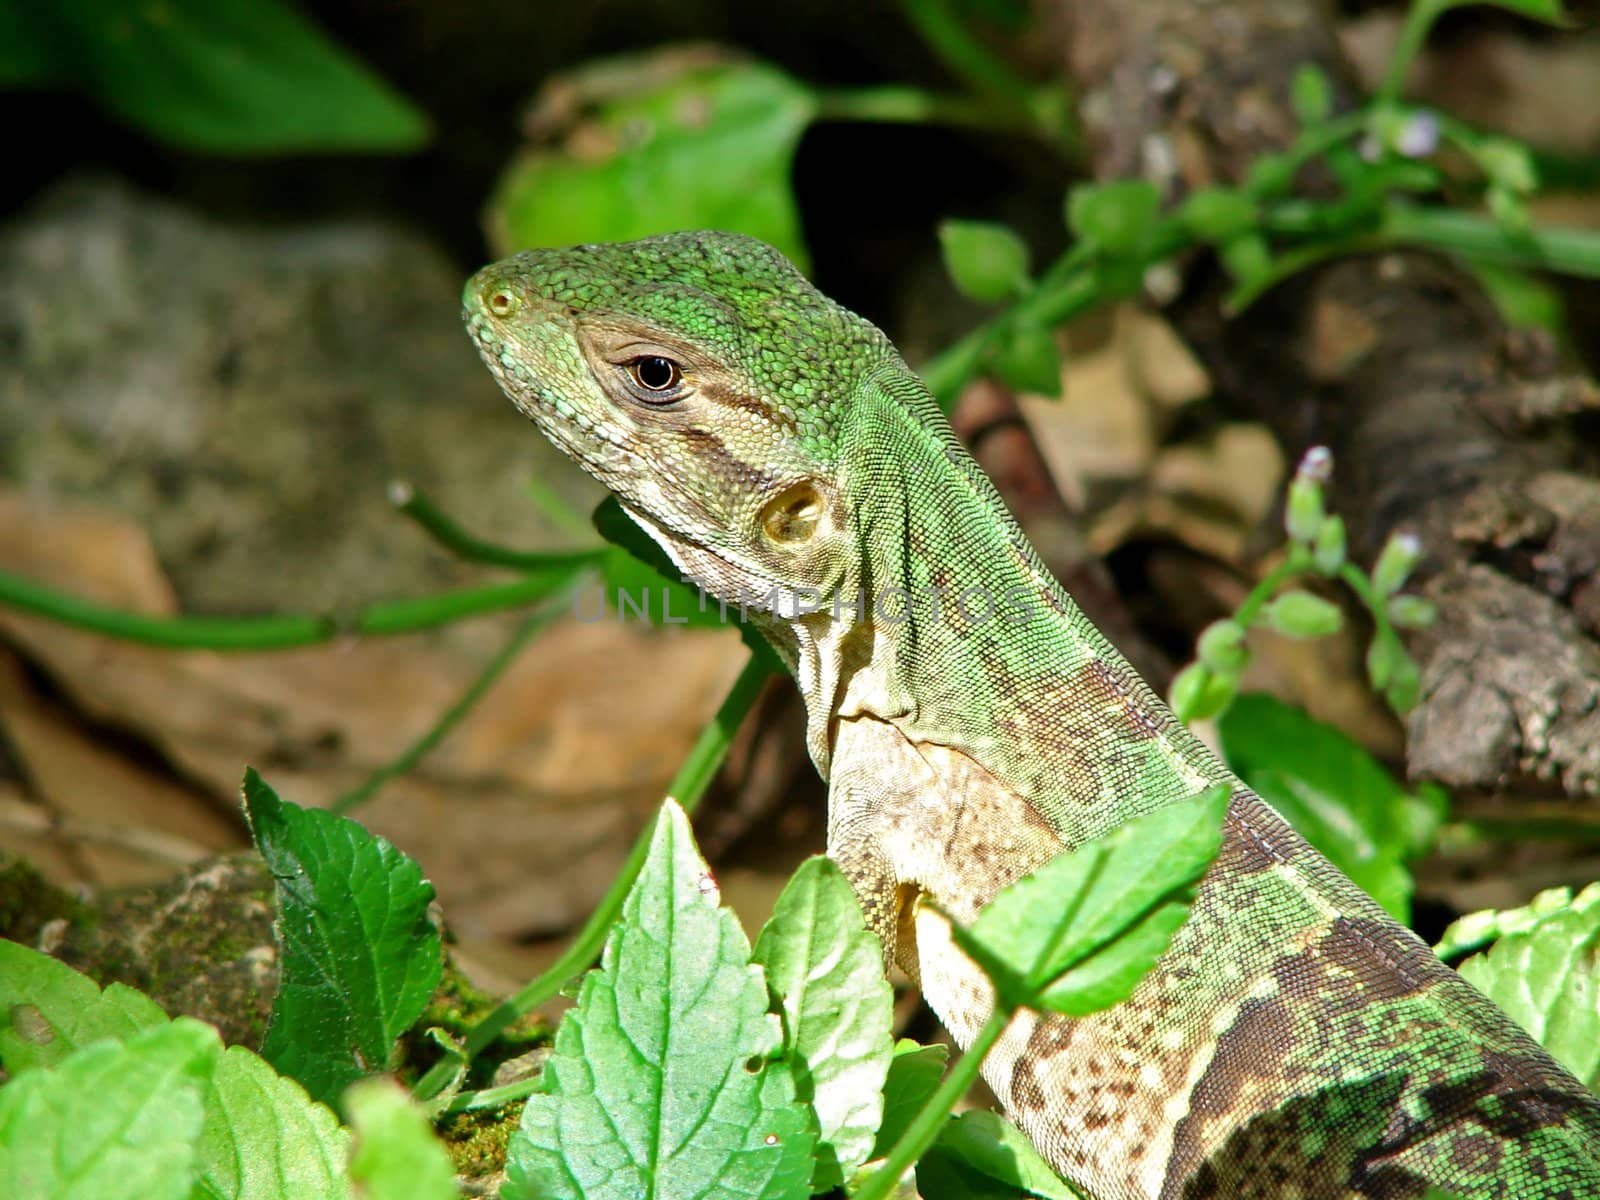 Green lizard close-up by Mirage3